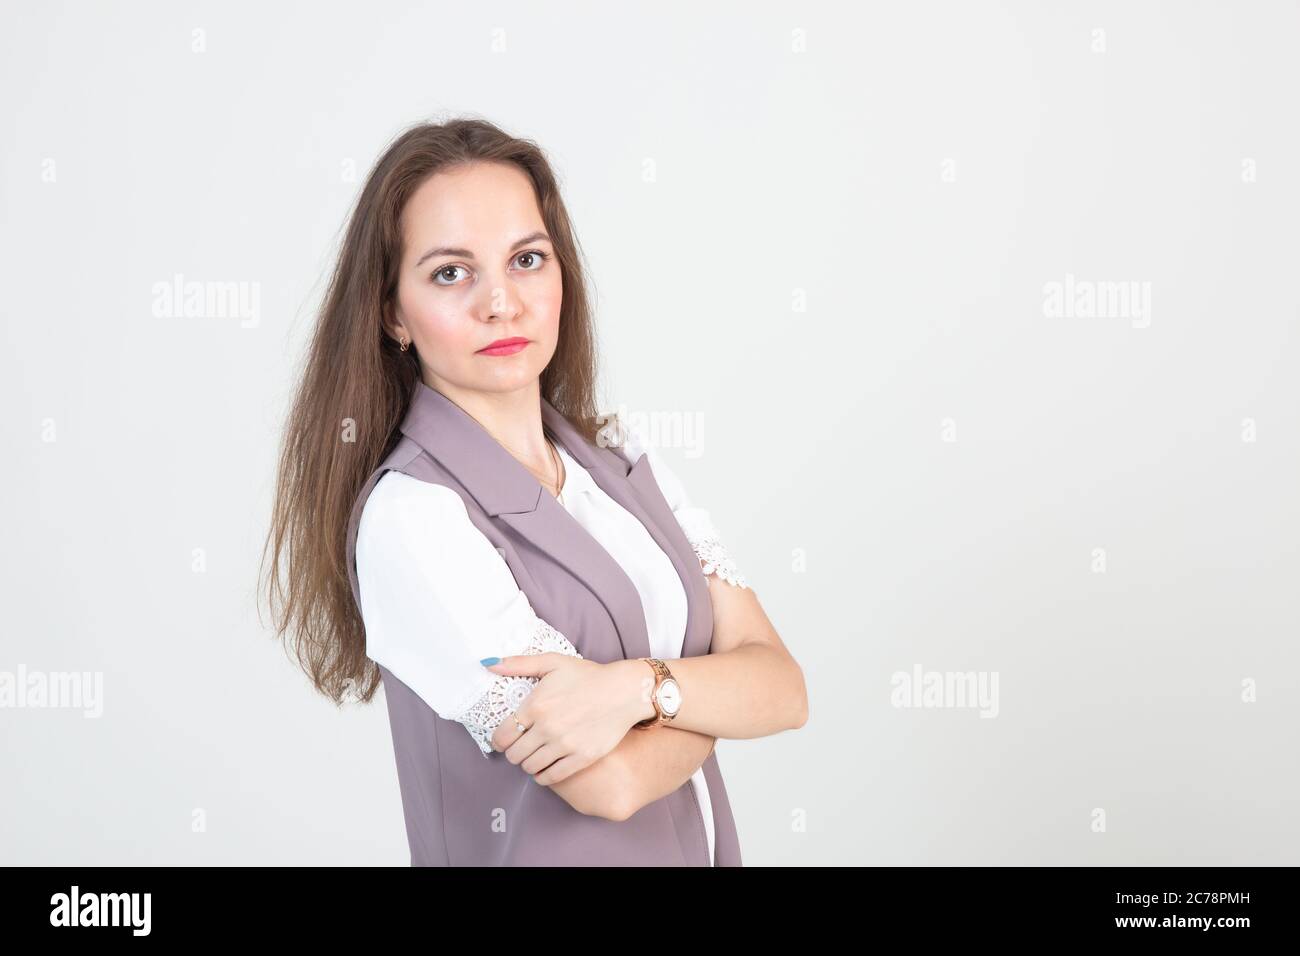 beautiful young woman in business strict clothes poses against a white wall Stock Photo